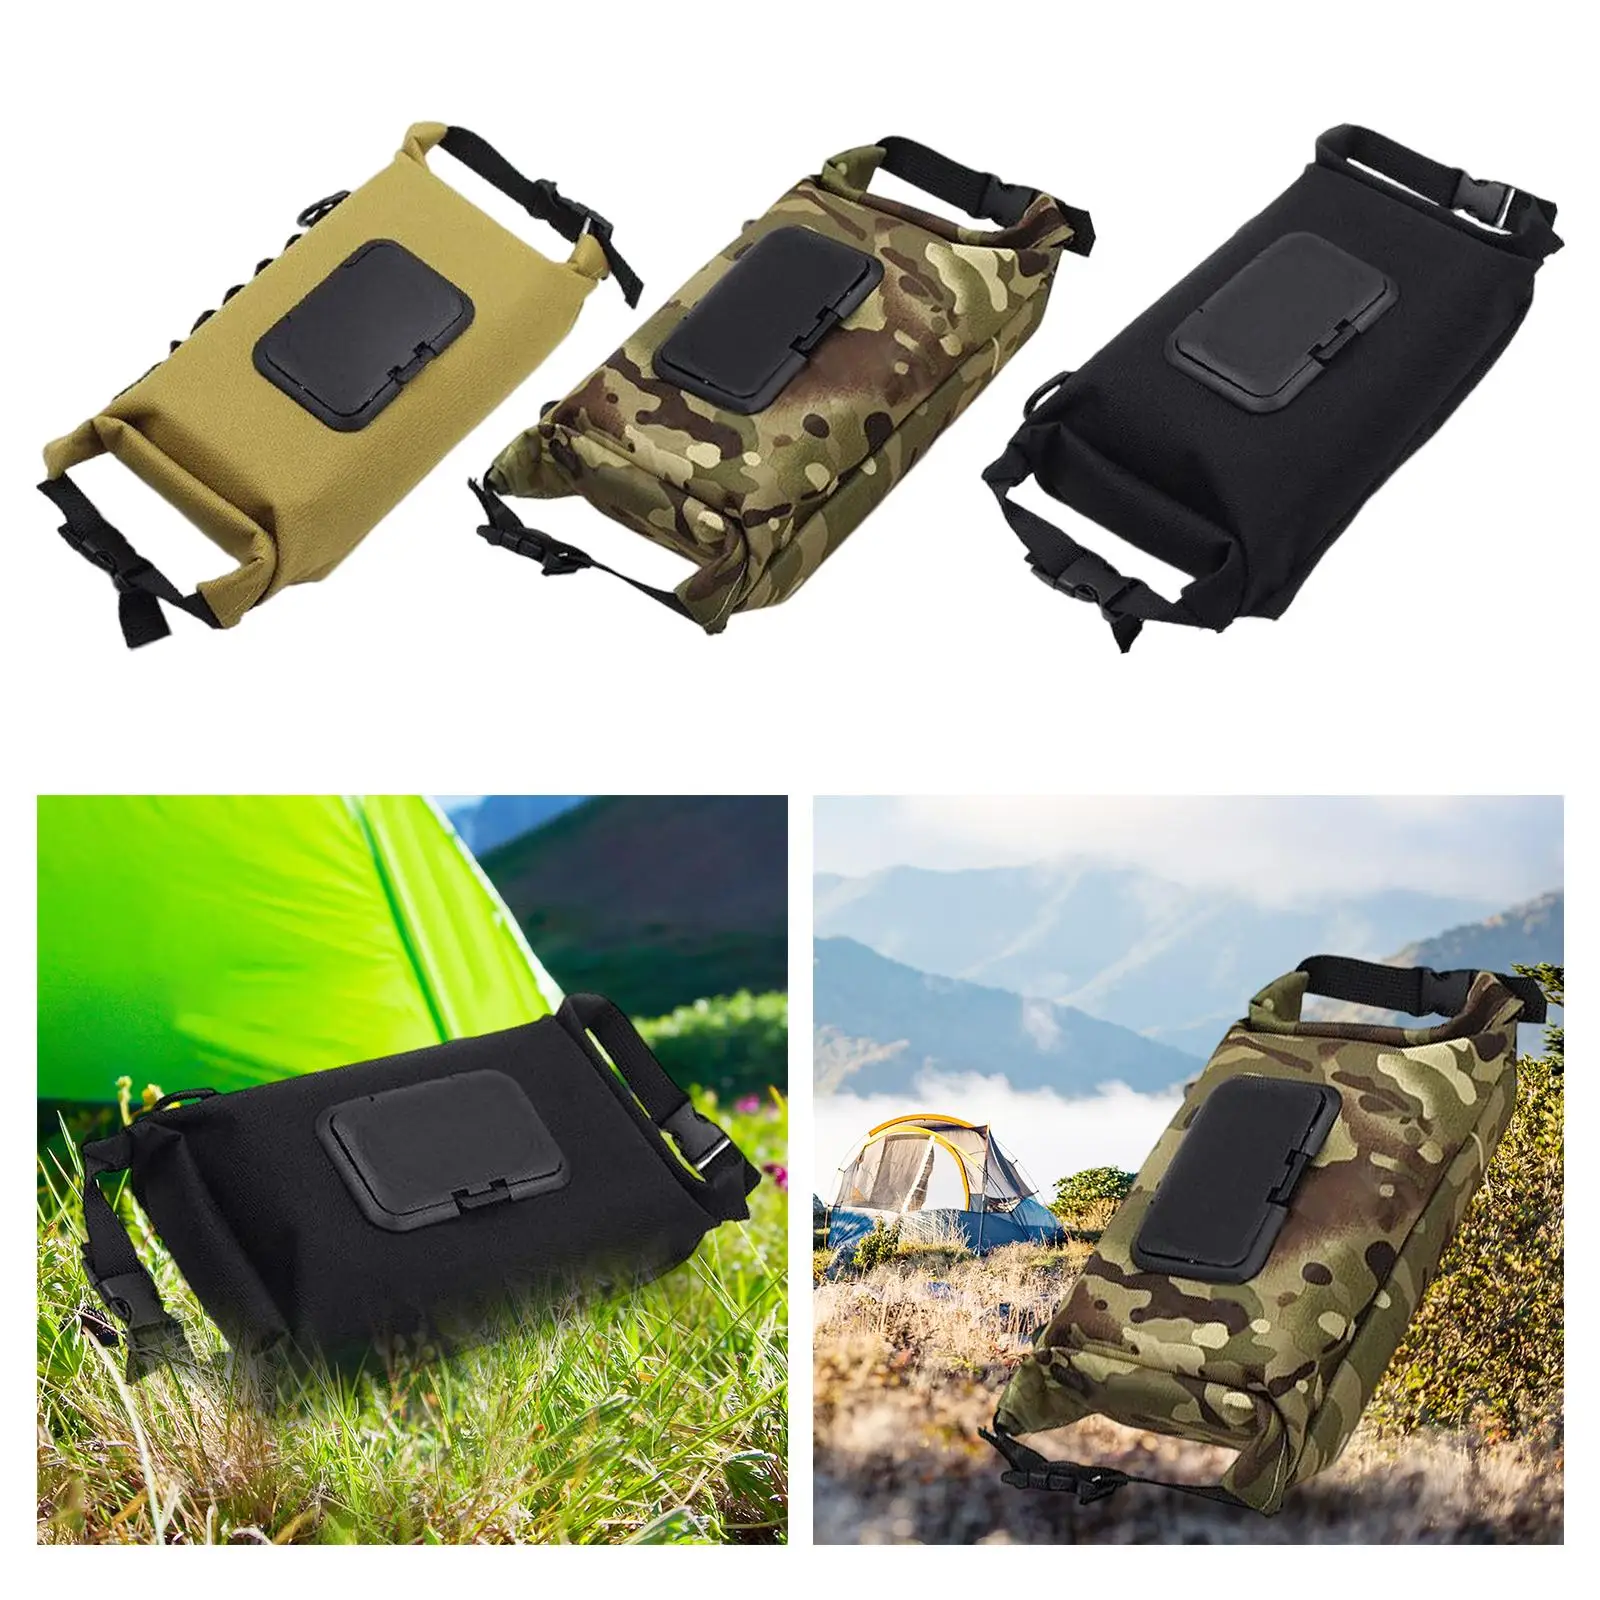 Portable Paper Towel Storage Bag Durable Canvas Foldable Napkin Organizer Camping Tissue Box for Restaurant Countertop Hiking